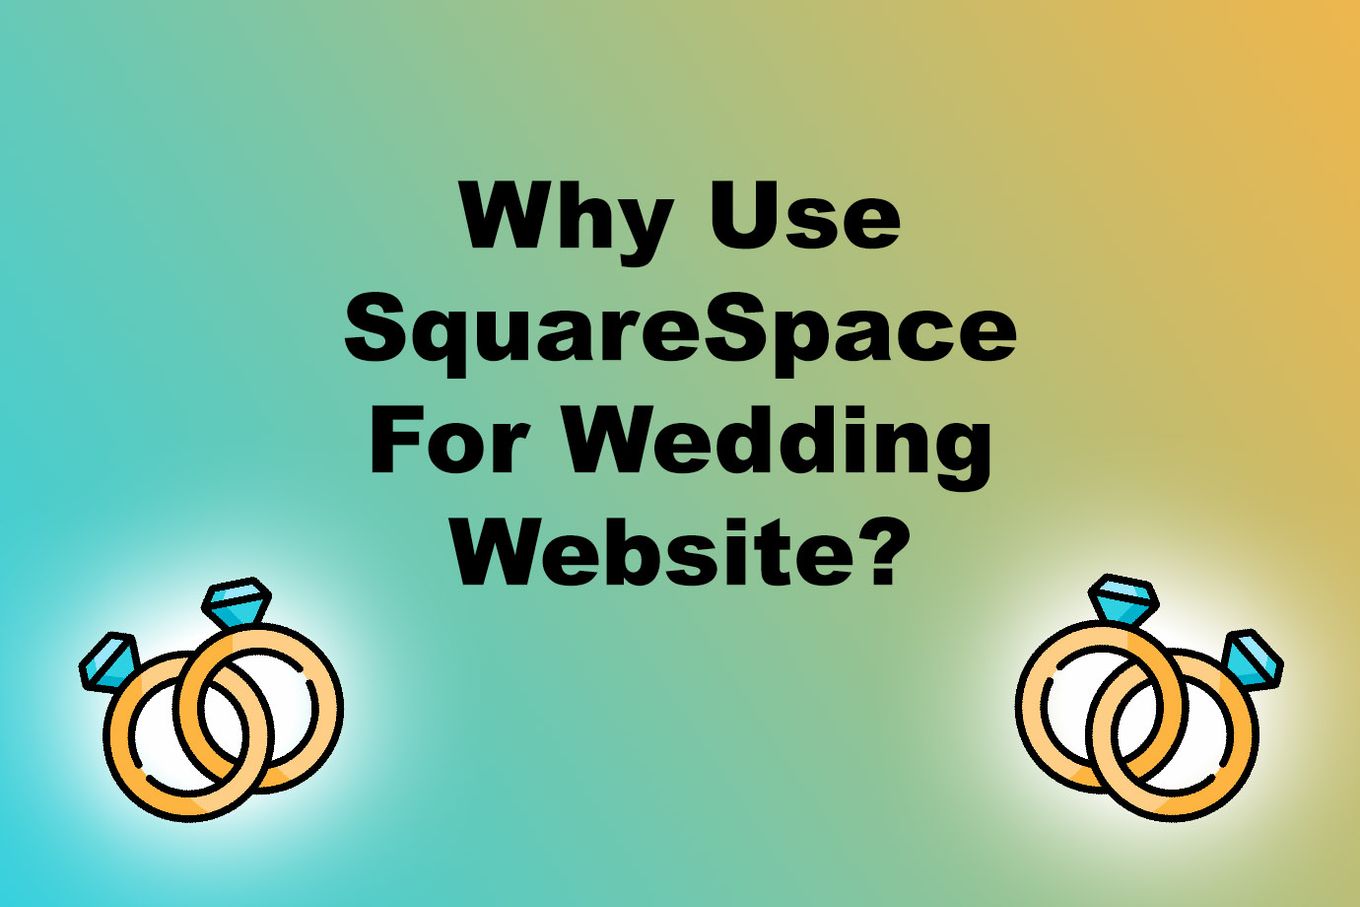 Why Use Squarespace For Wedding Website?